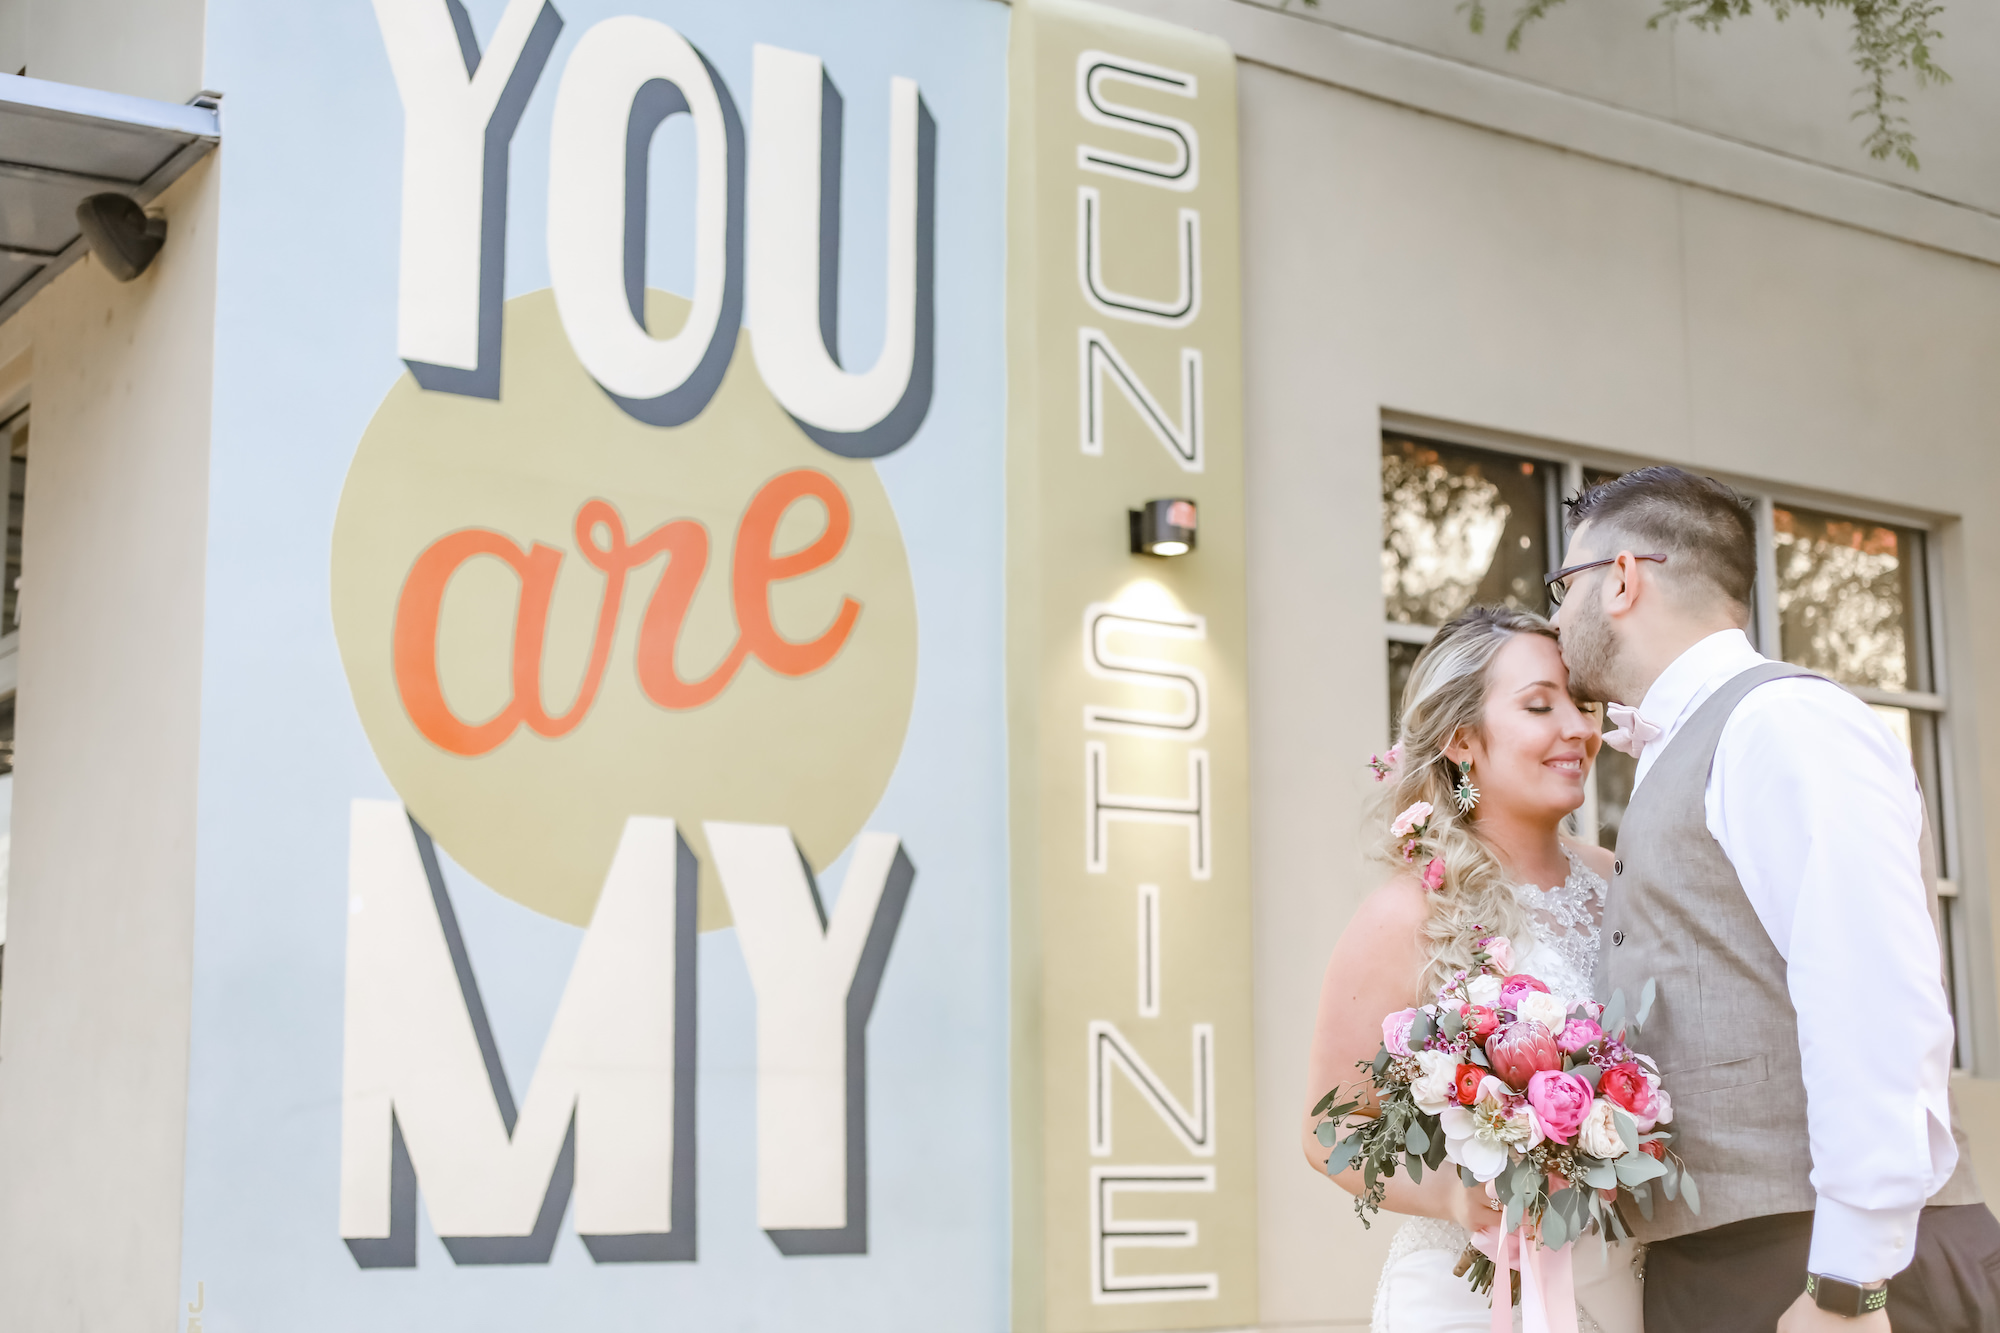 Tampa Bay Bride and Groom in front of You are My Sunshine Mural, Bride Holding Elegant Red, Pink, and White Floral Bouquet with Greenery | Florida Wedding Photographer Lifelong Photography Studios